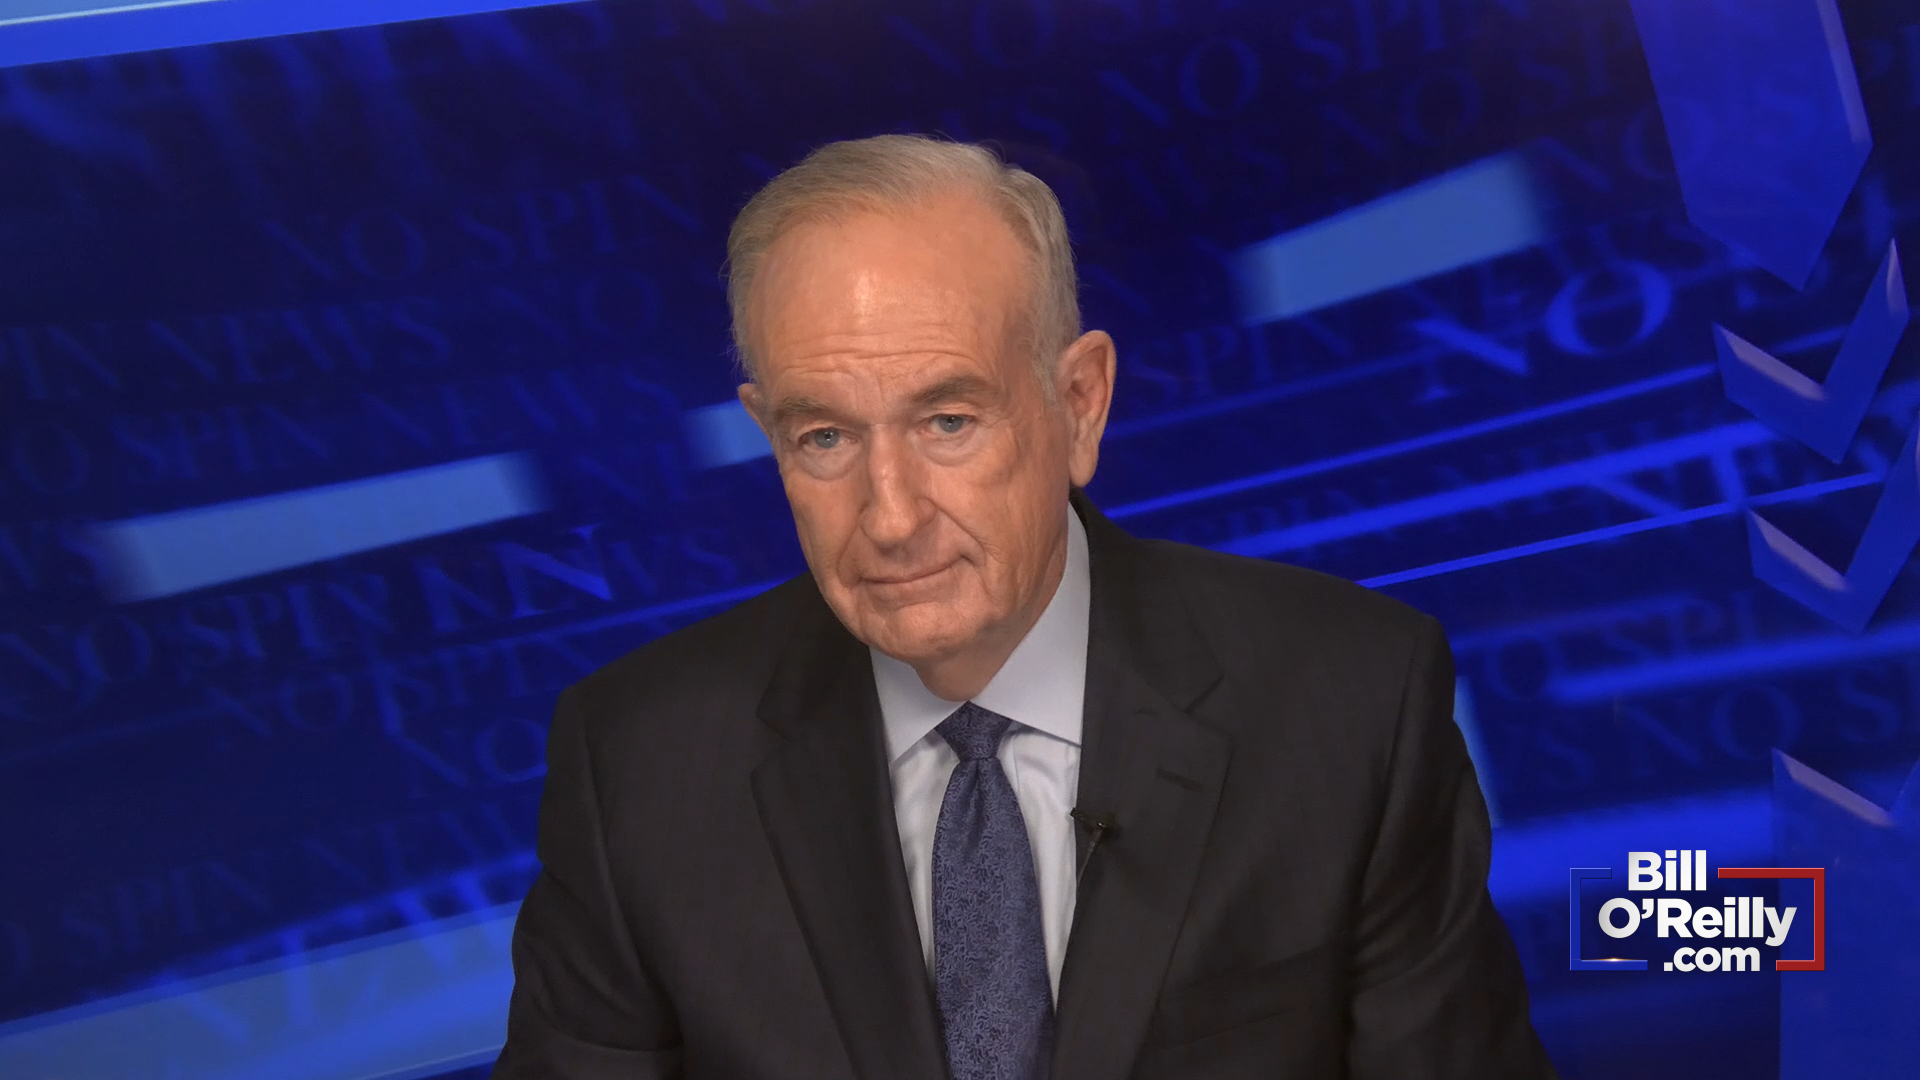 O'Reilly on the Texas Ruling: SCOTUS Got It Right!